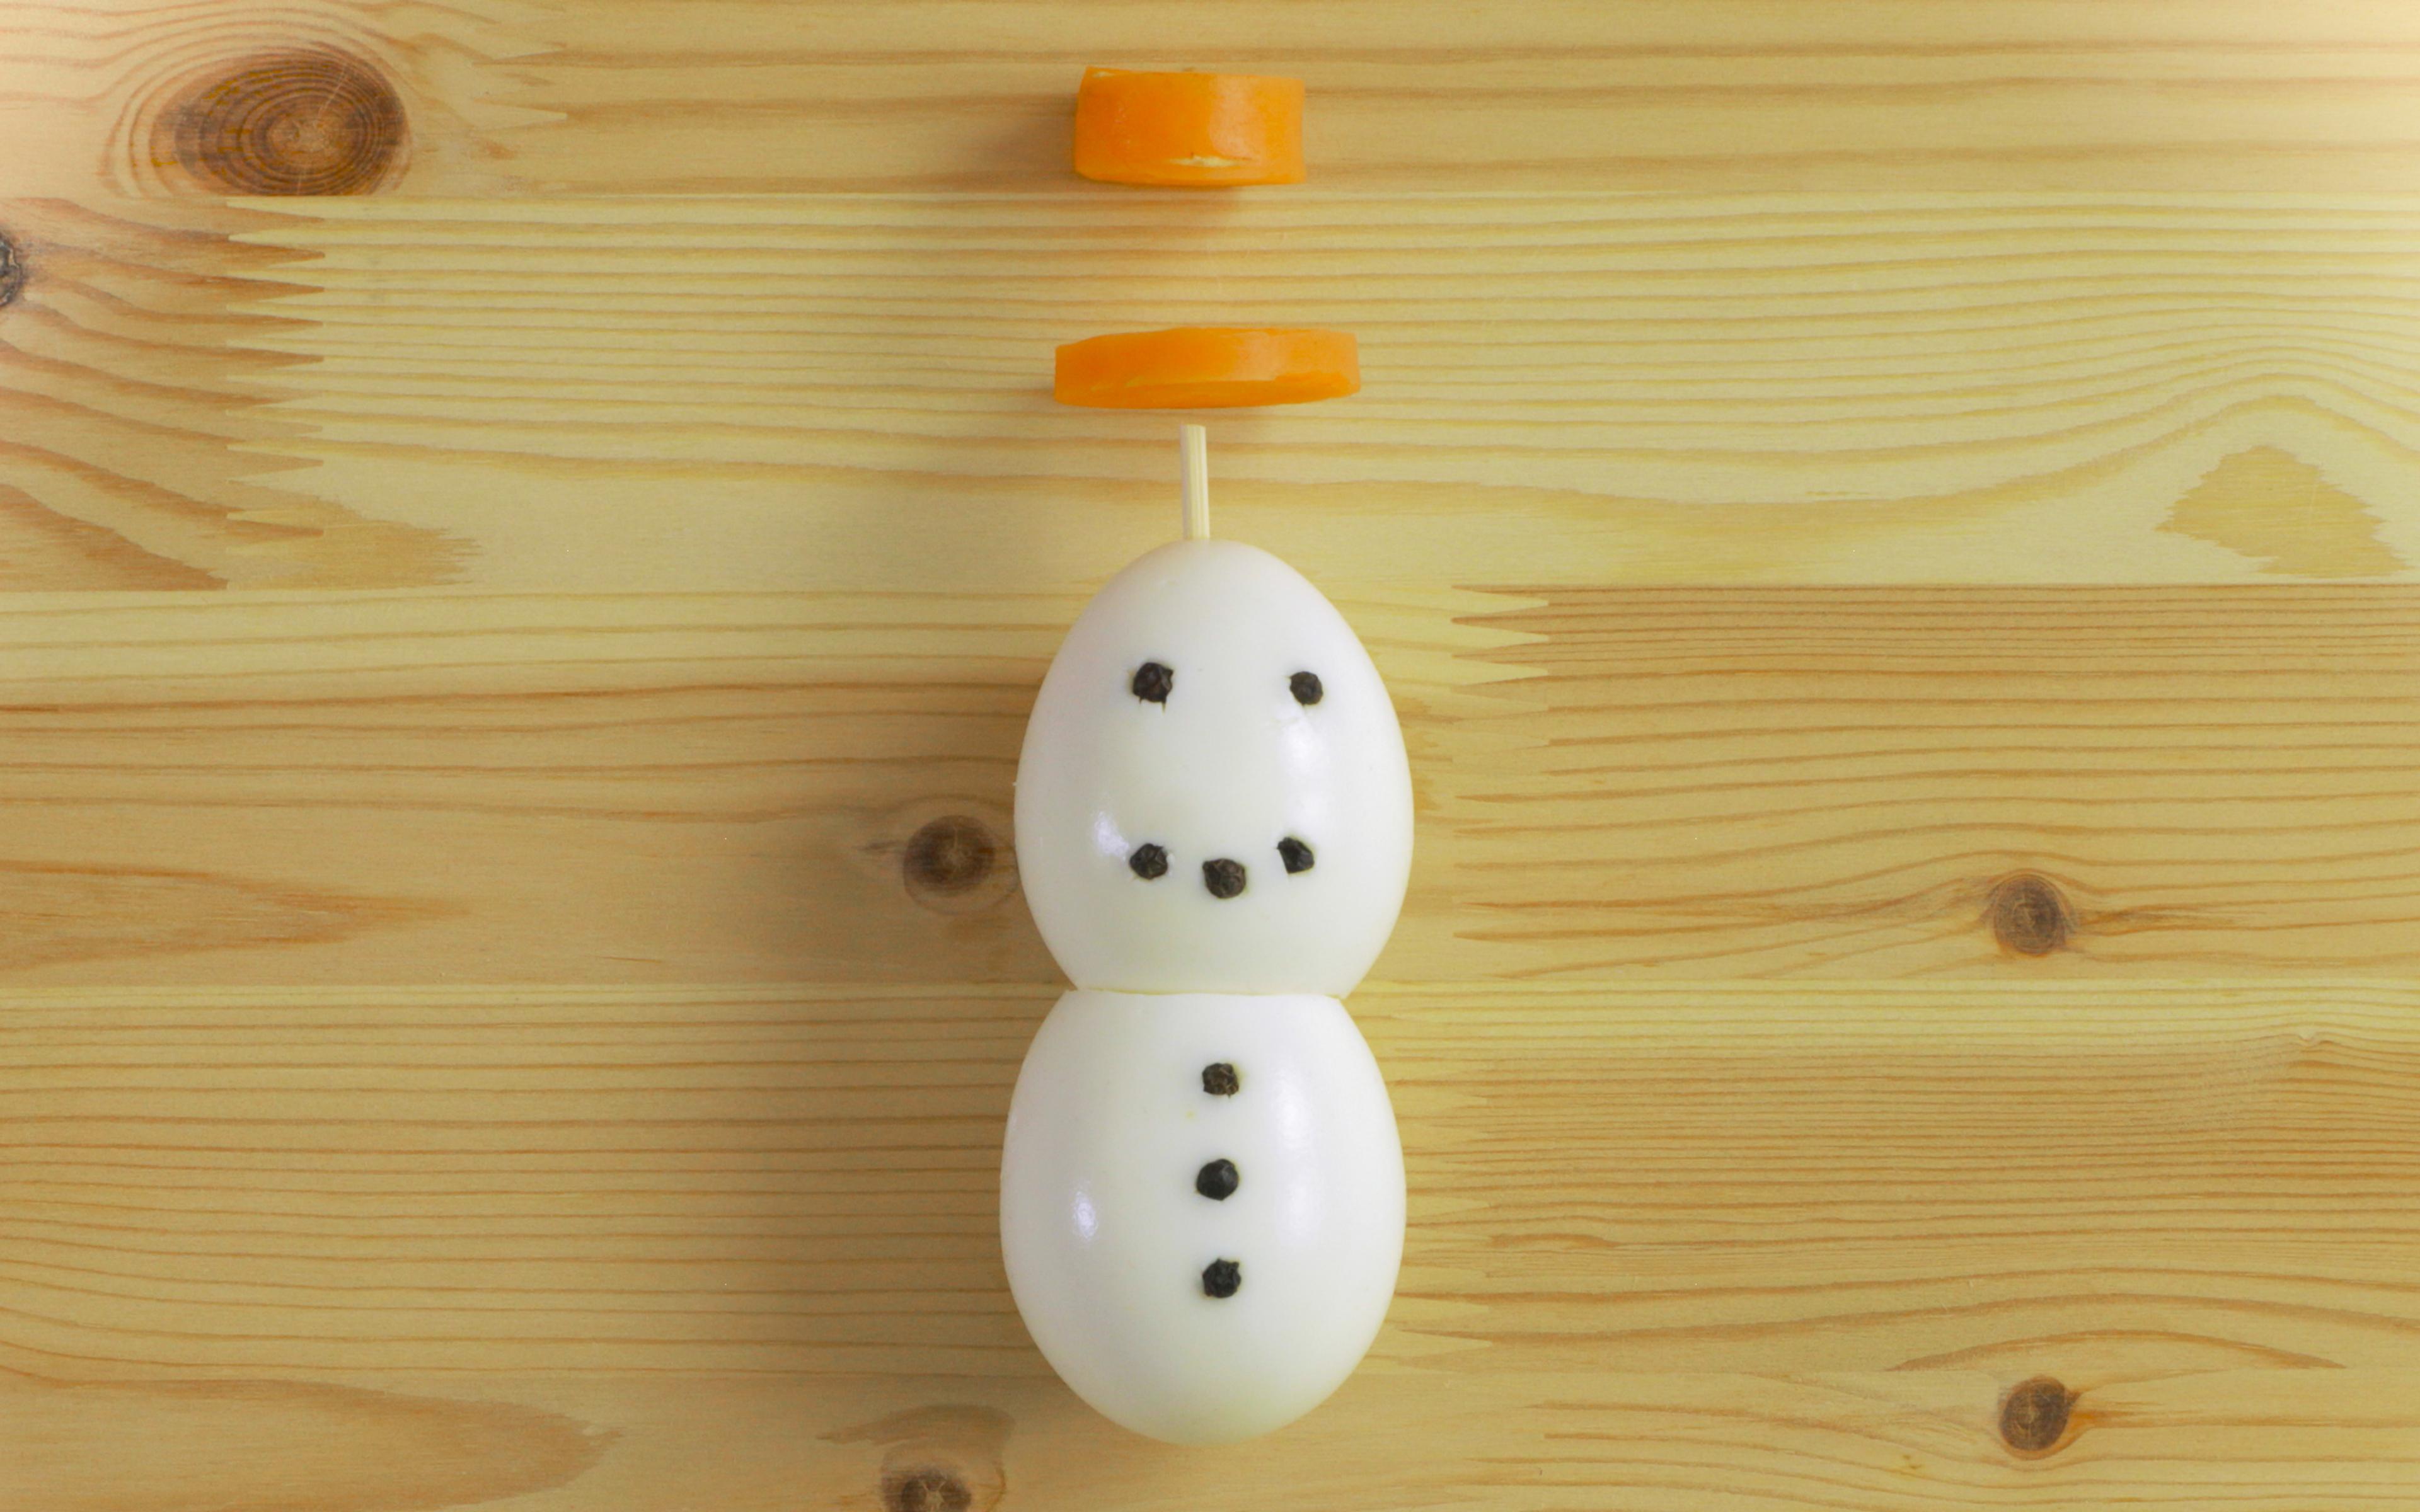 Egg snowman with hat and peppercorn buttons and eyes.